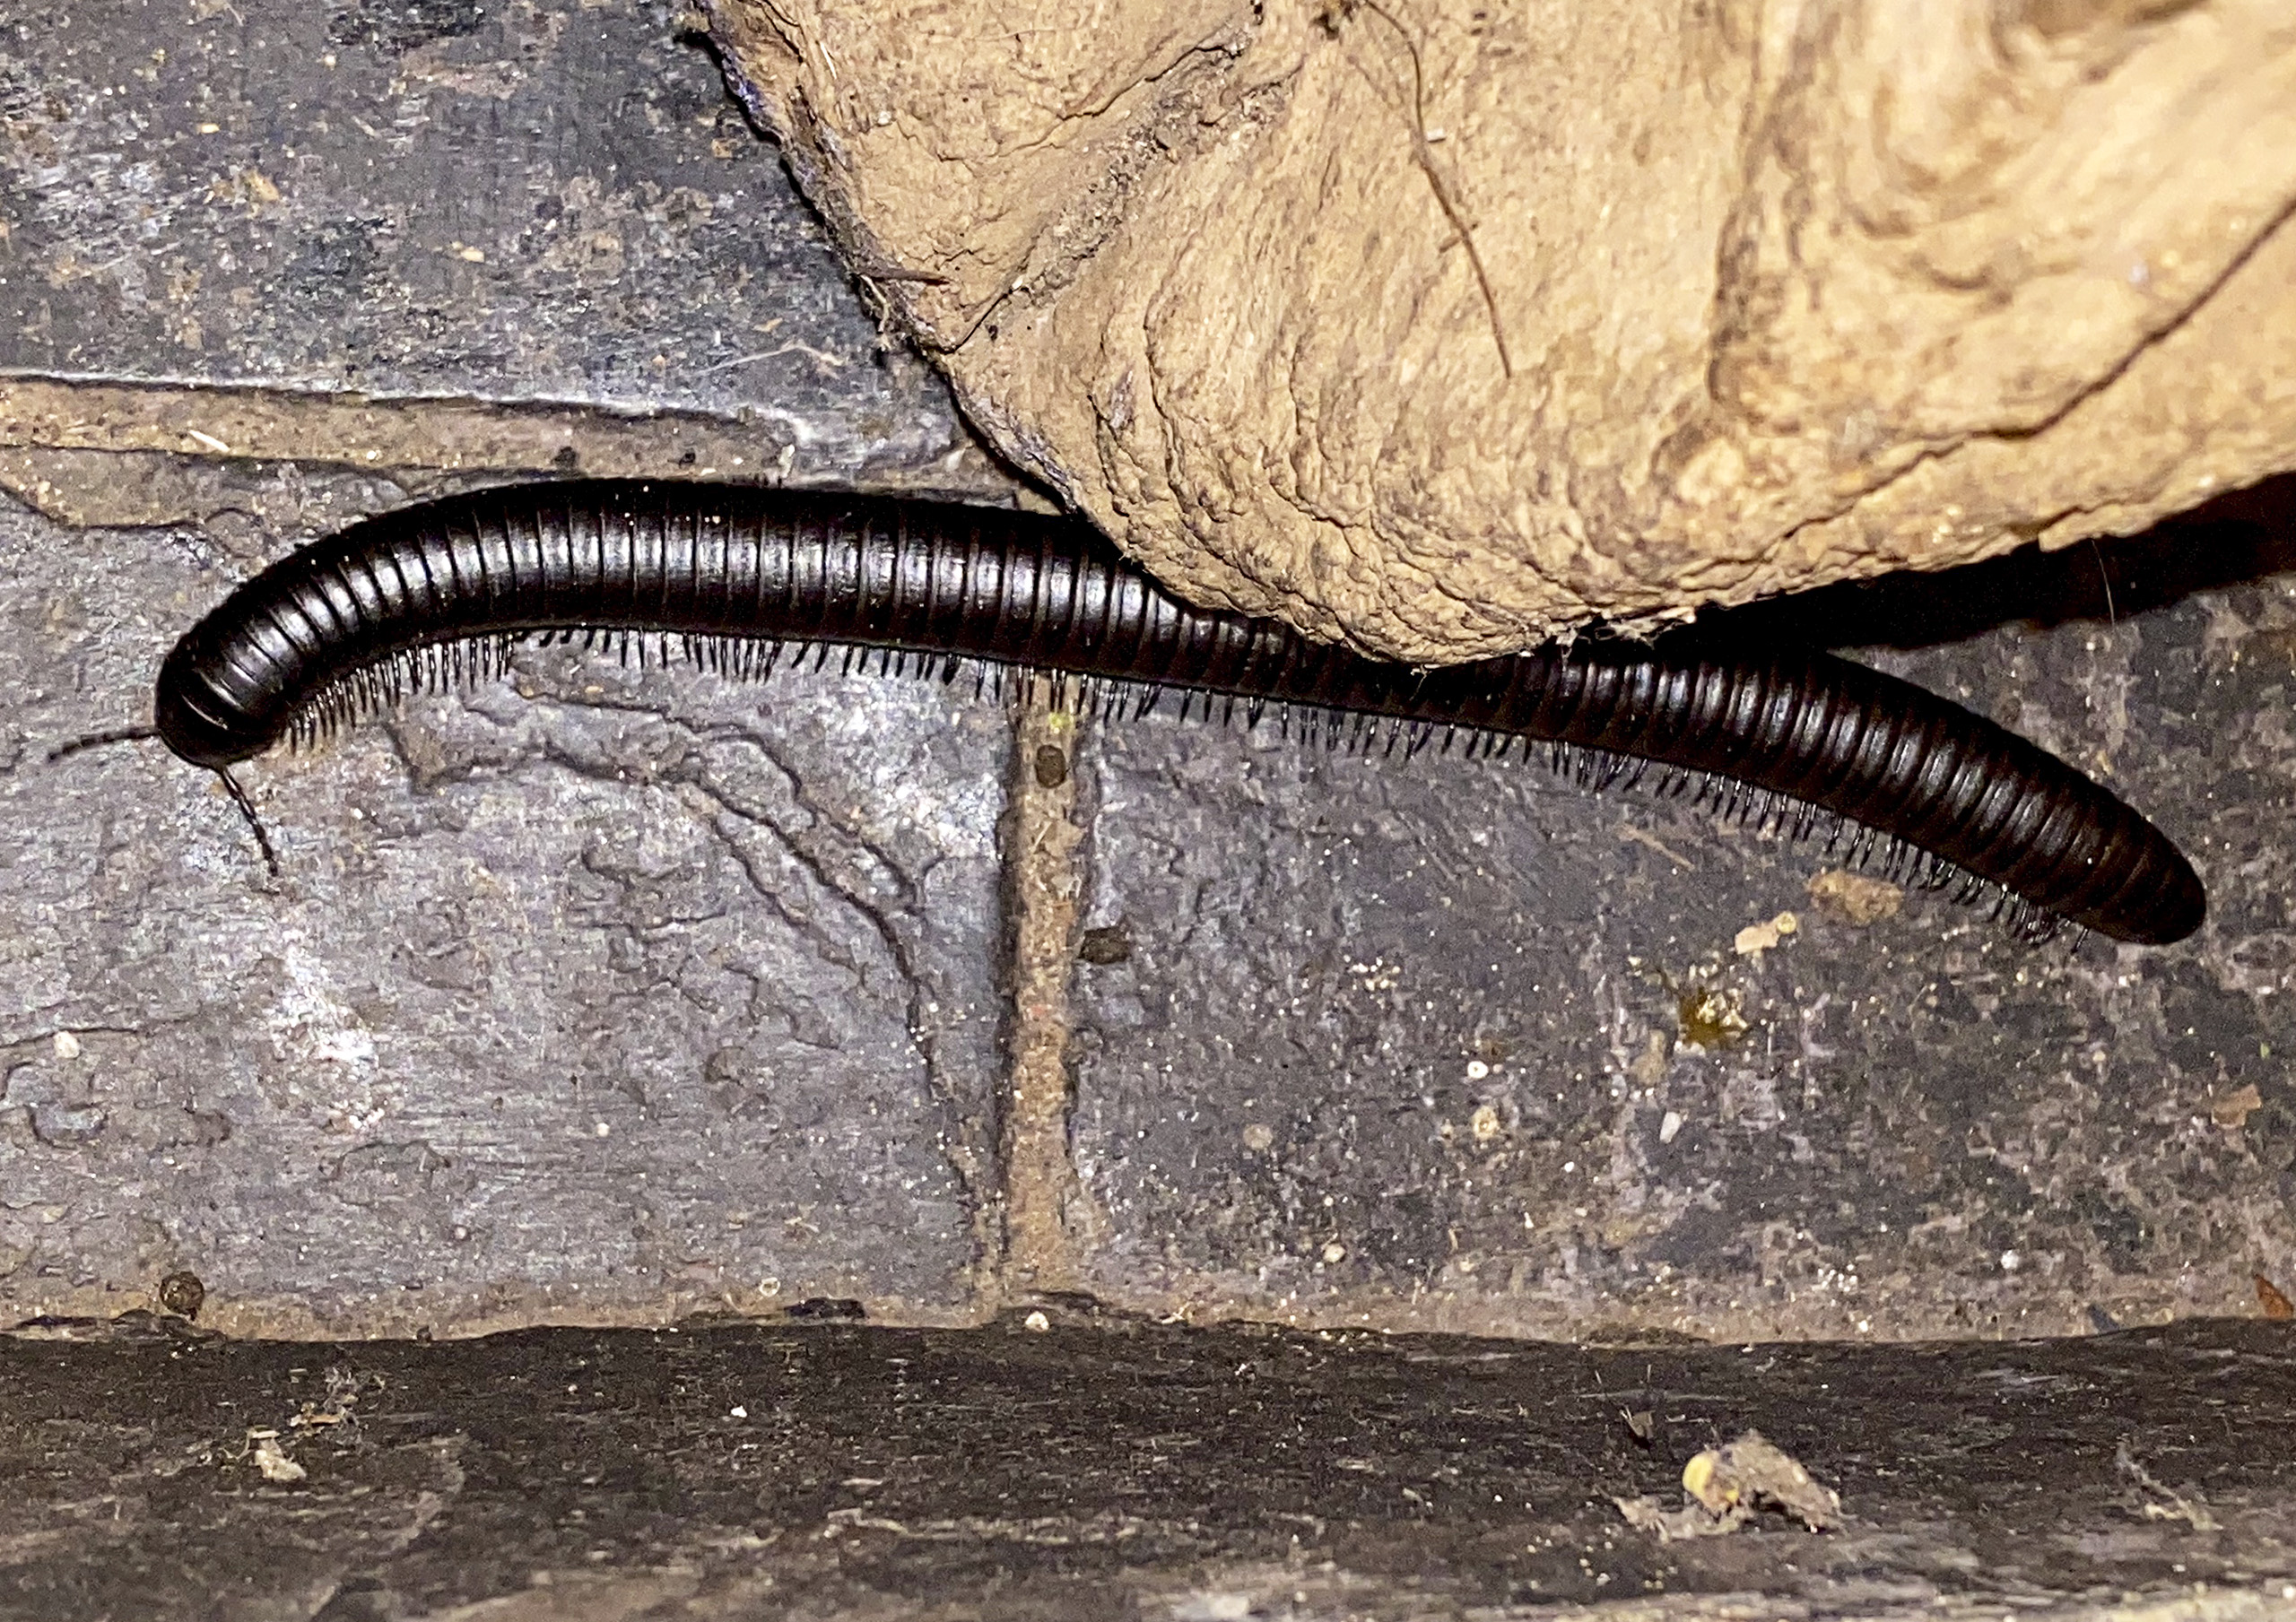 Insect - Millipede